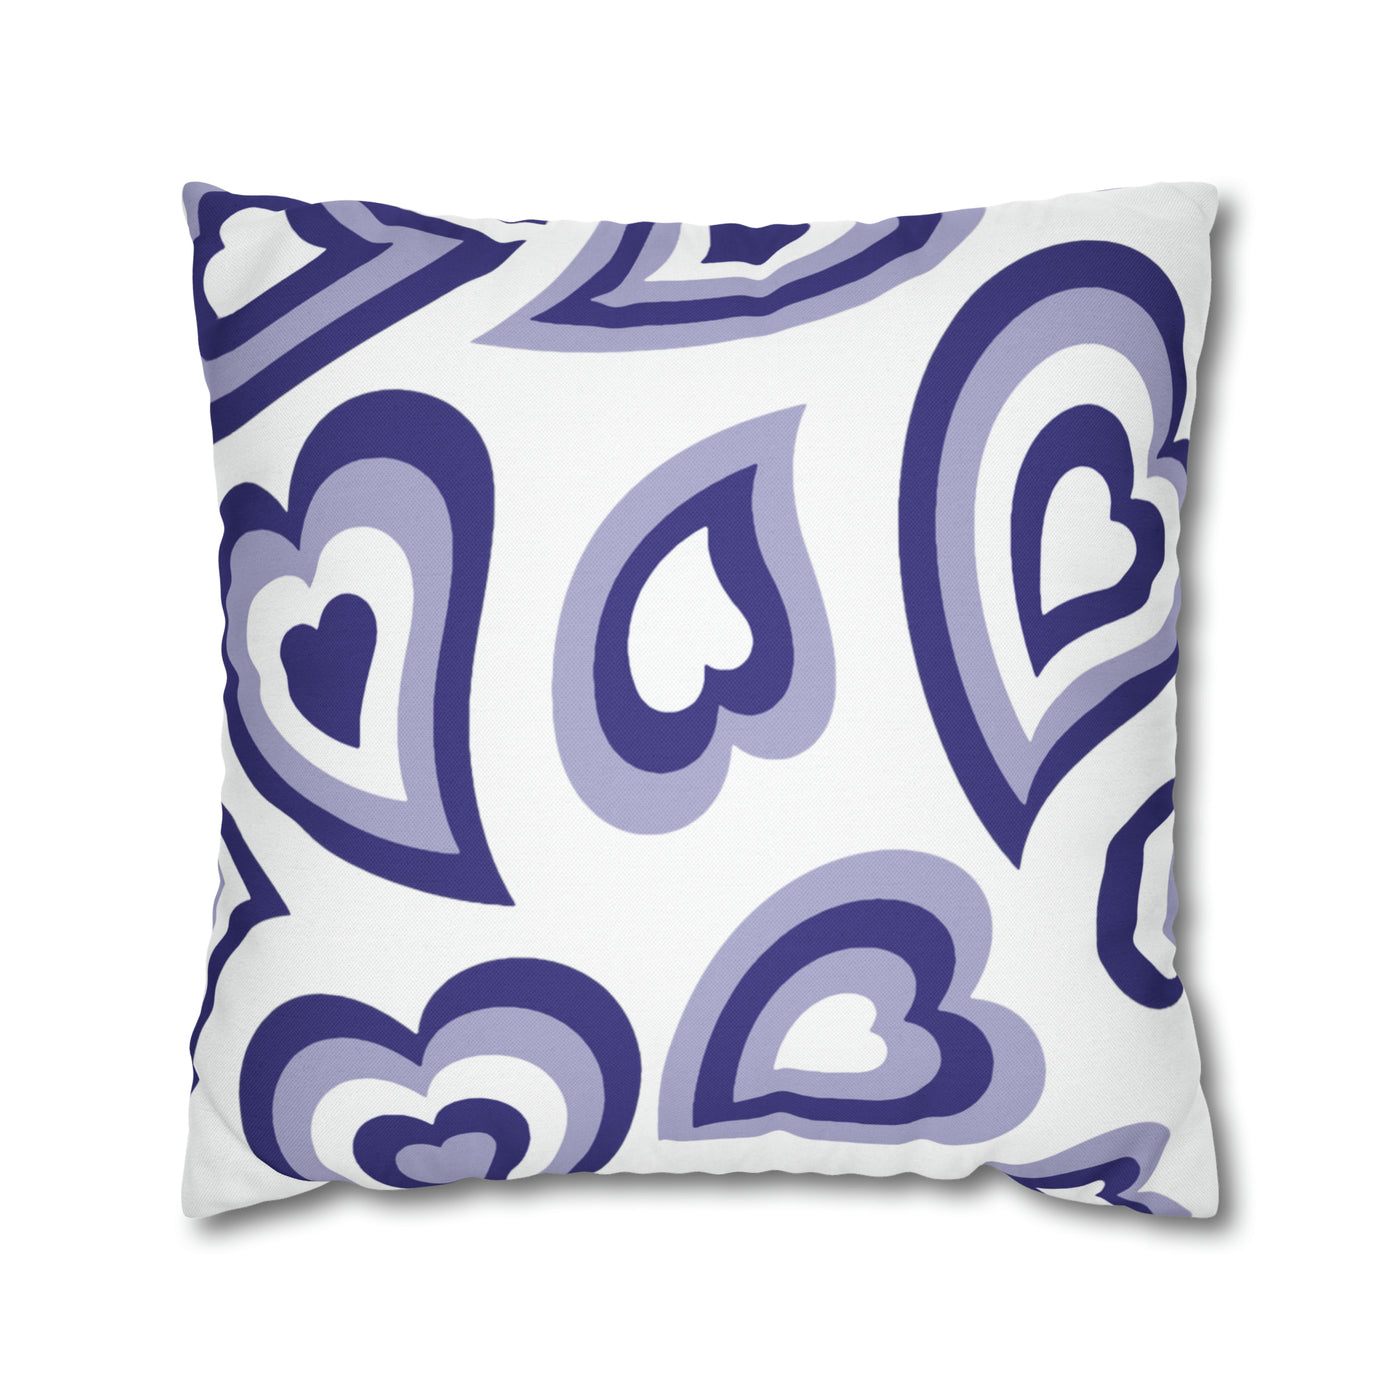 Retro Heart Pillow - Purple & White, Heart Pillow, Hearts, Valentine's Day, Northwestern, Bed Party Pillow, Sleepaway Camp Pillow, Camp